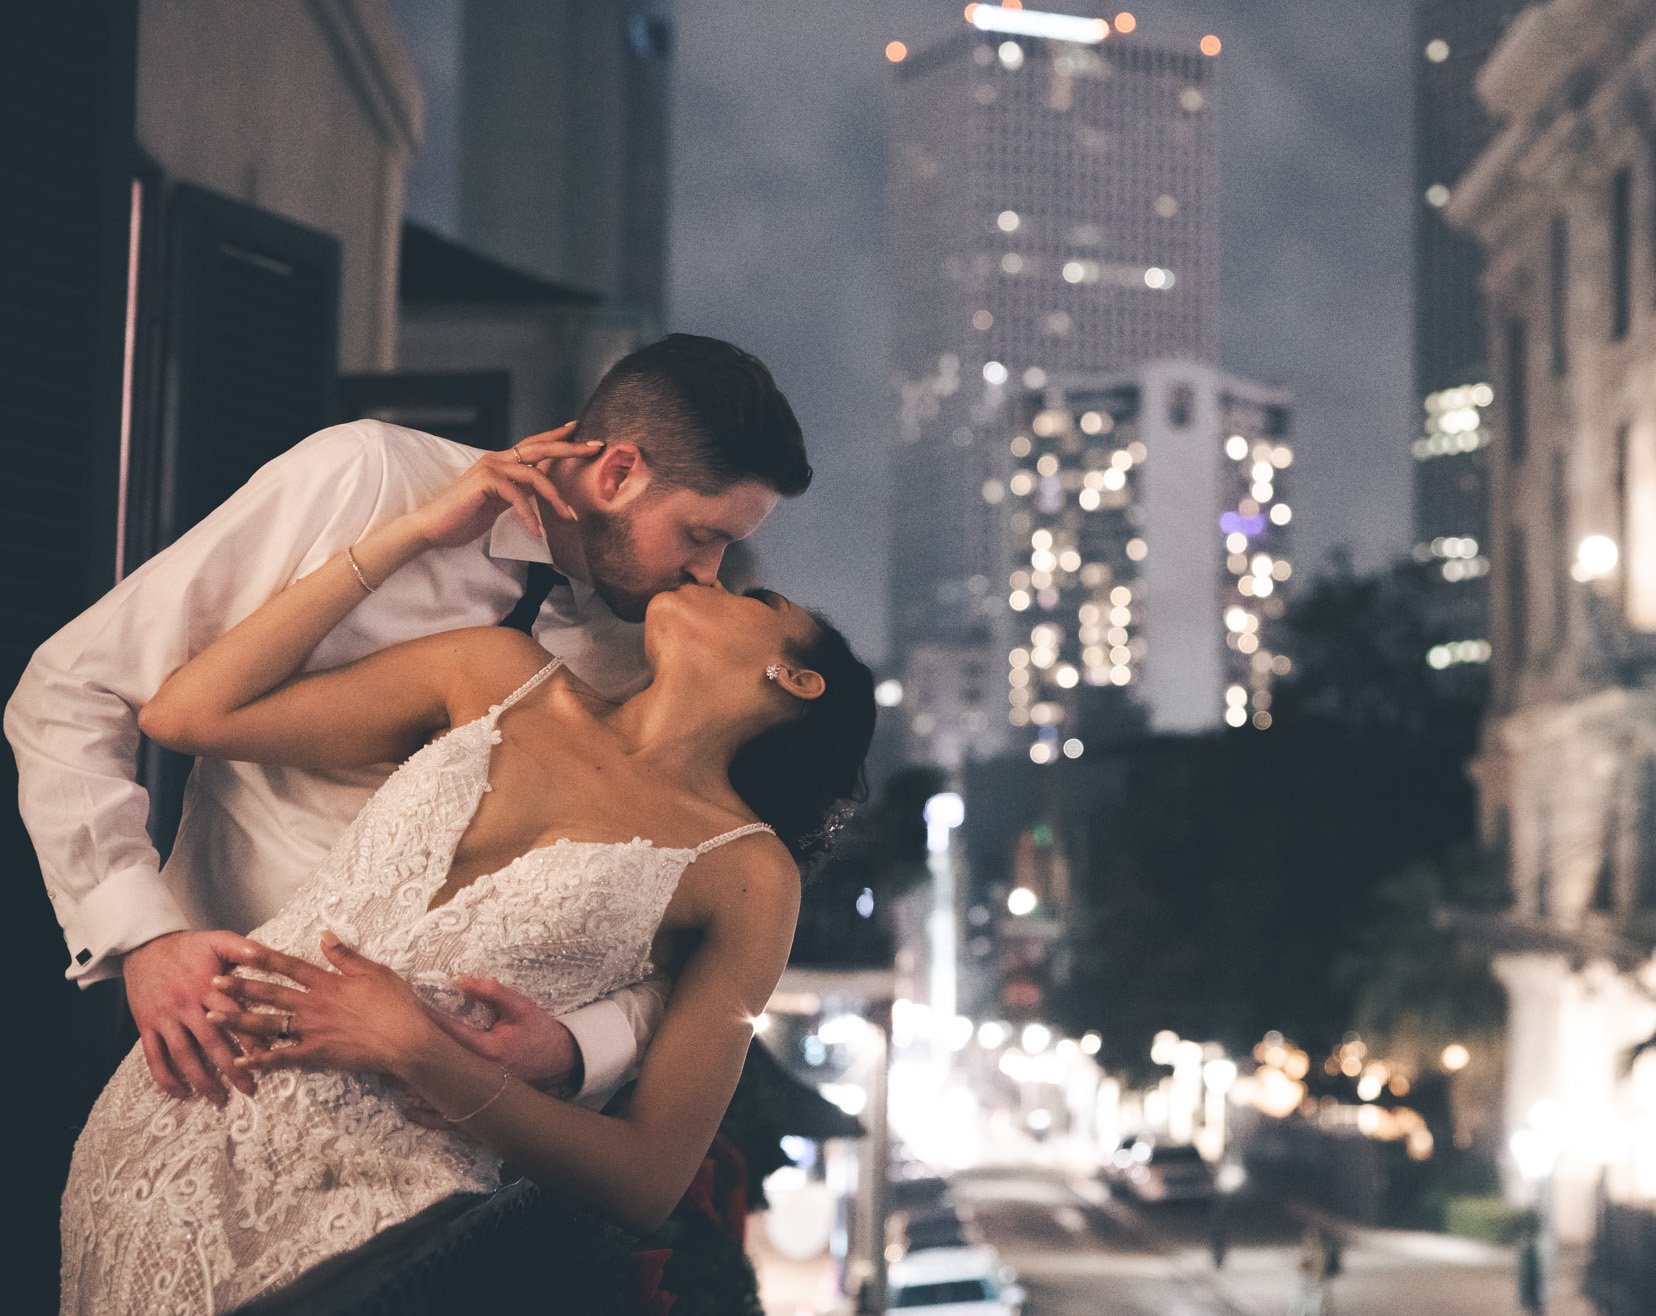 A bride and groom kiss on a balcony at night with the NOLA city lights in the background.